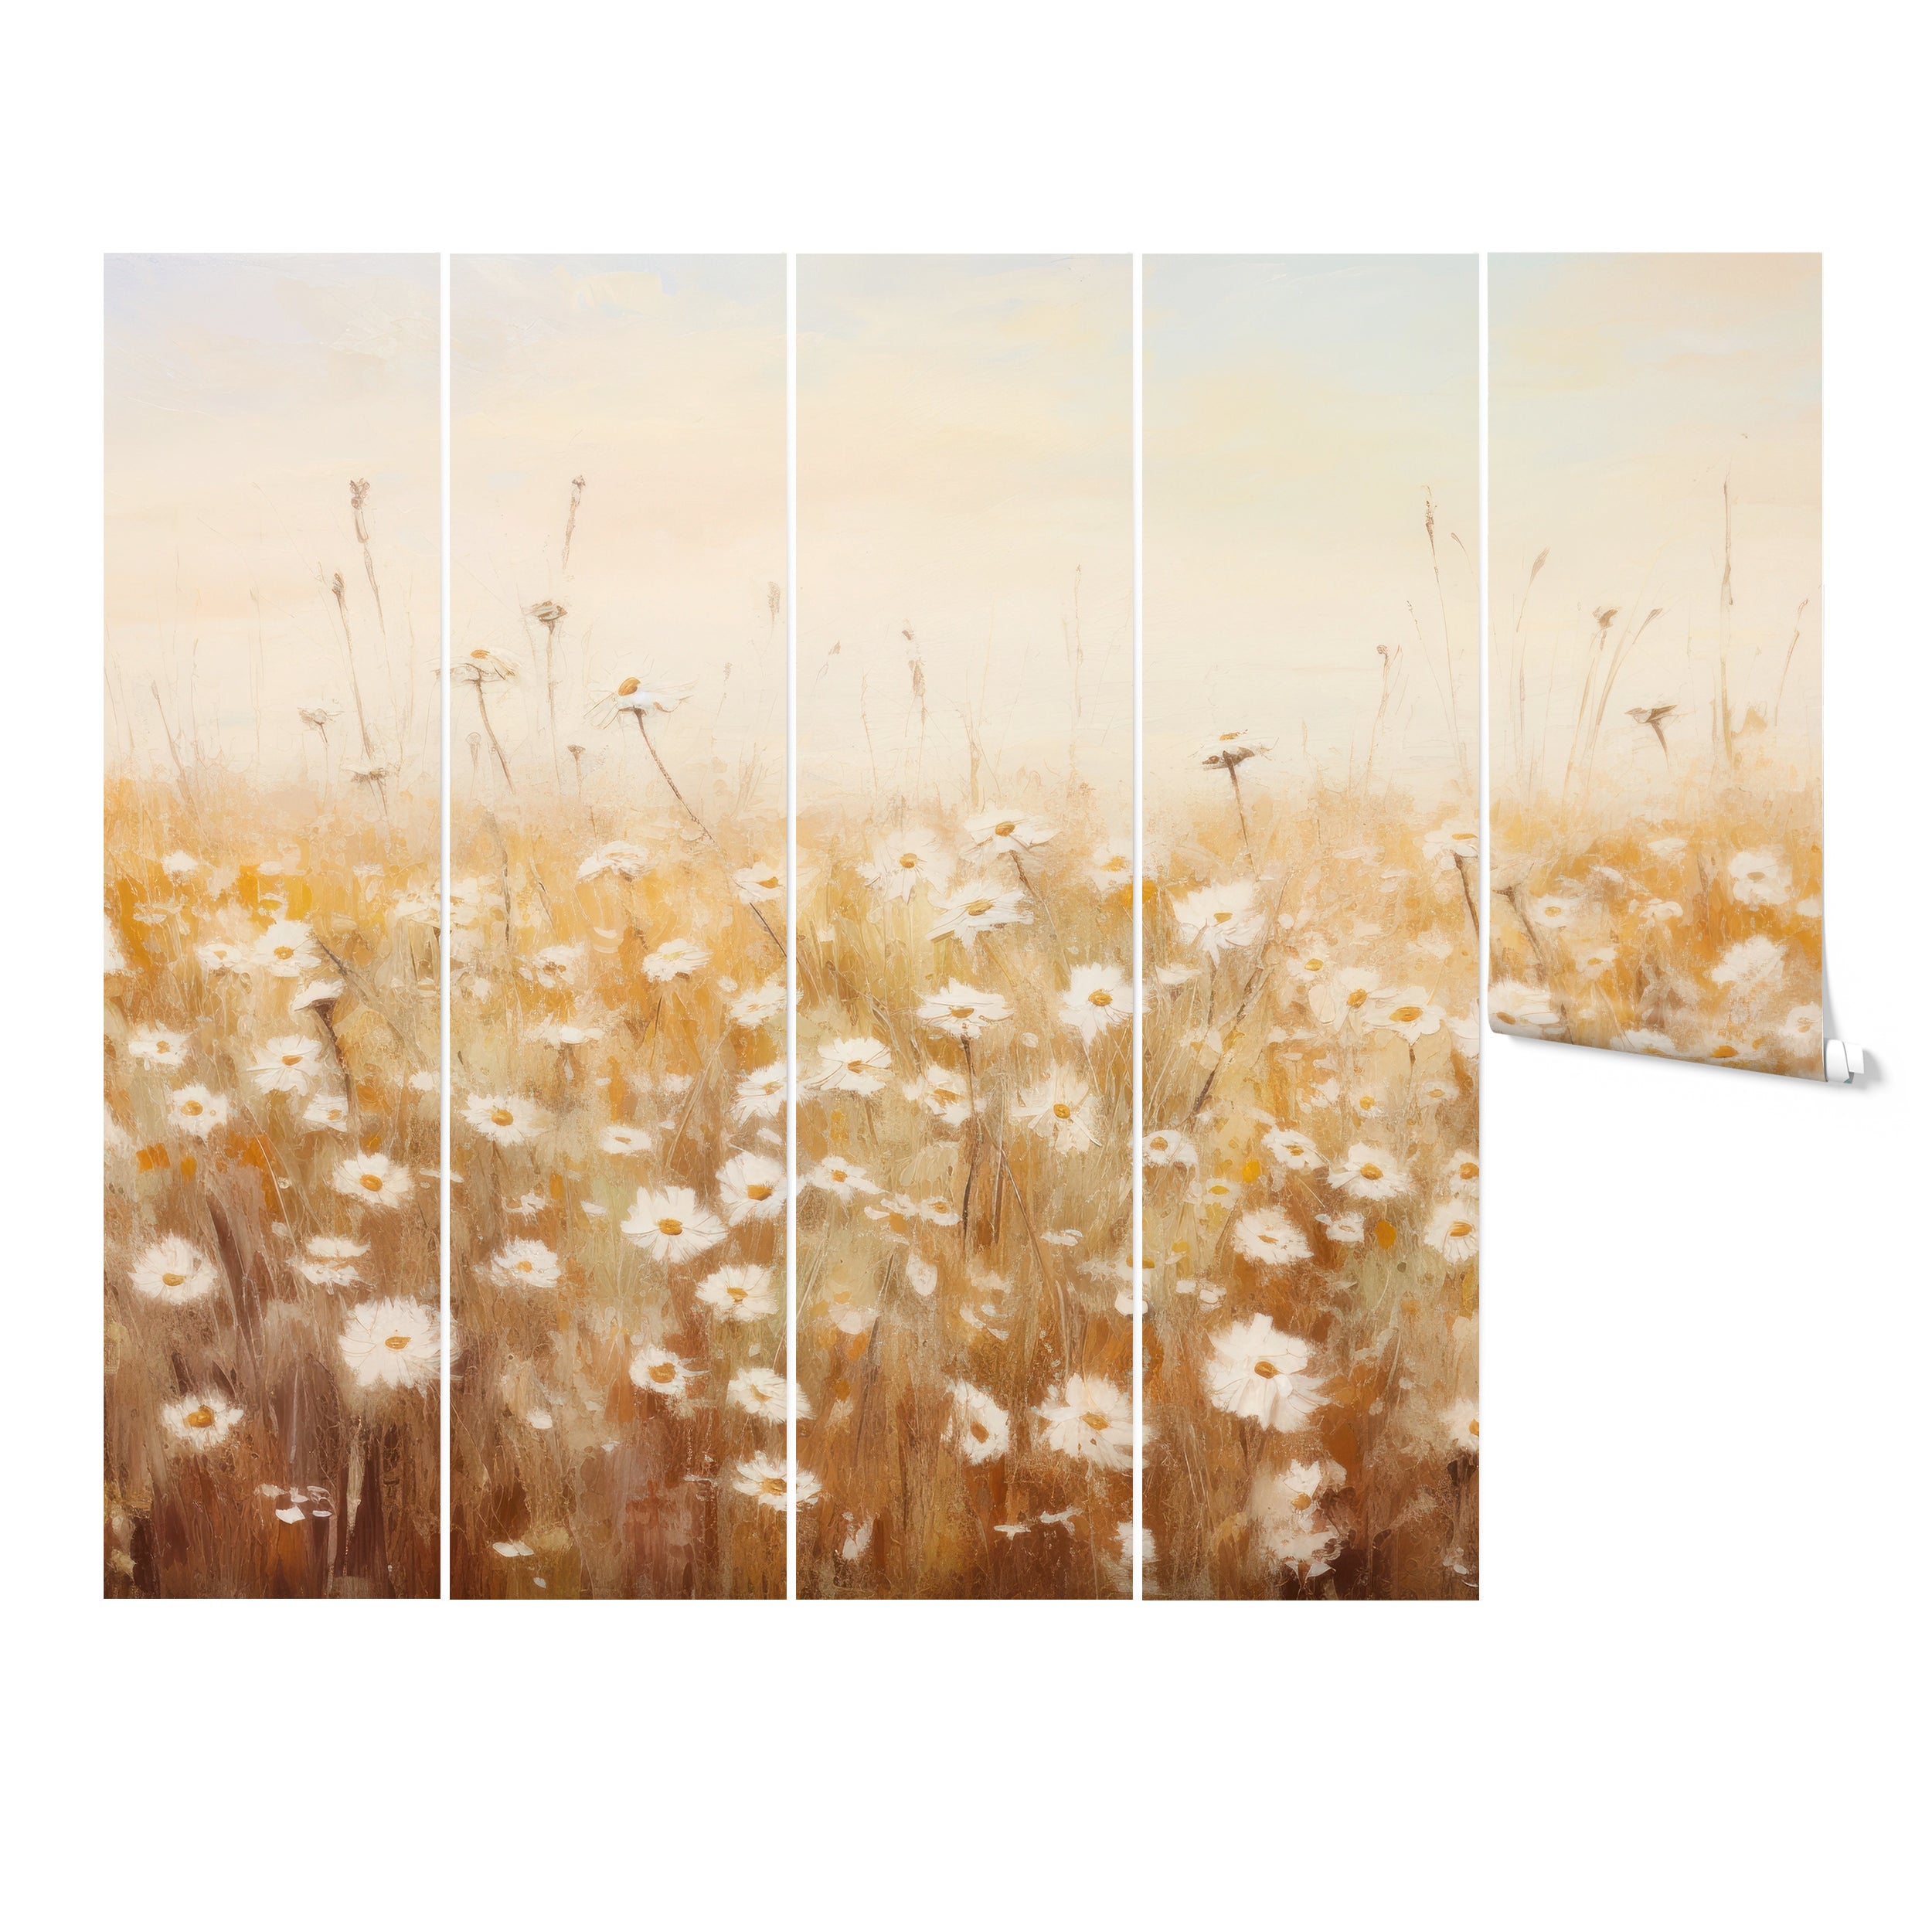 Annapolis Royal mural featuring a field of white daisies in warm, golden tones